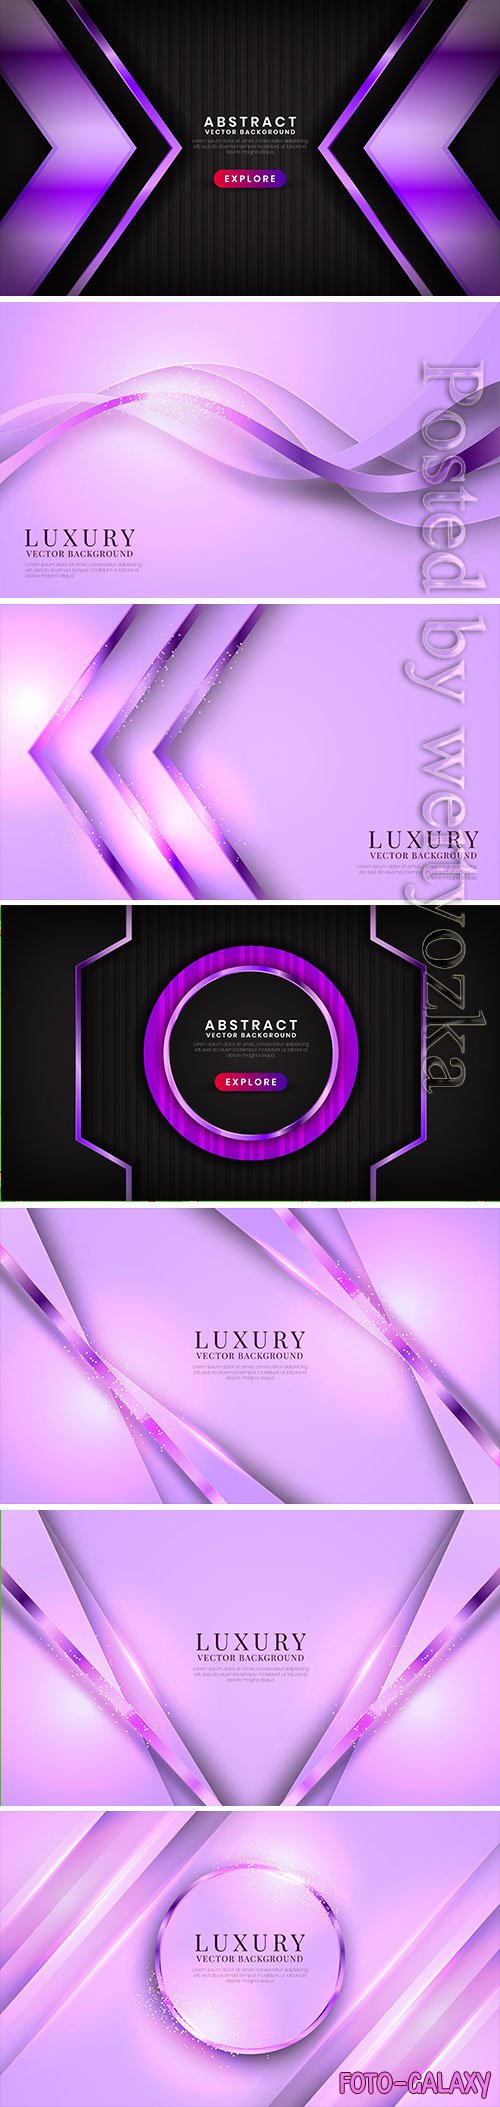 Abstract 3d purple luxury background with shiny metallic waves effect